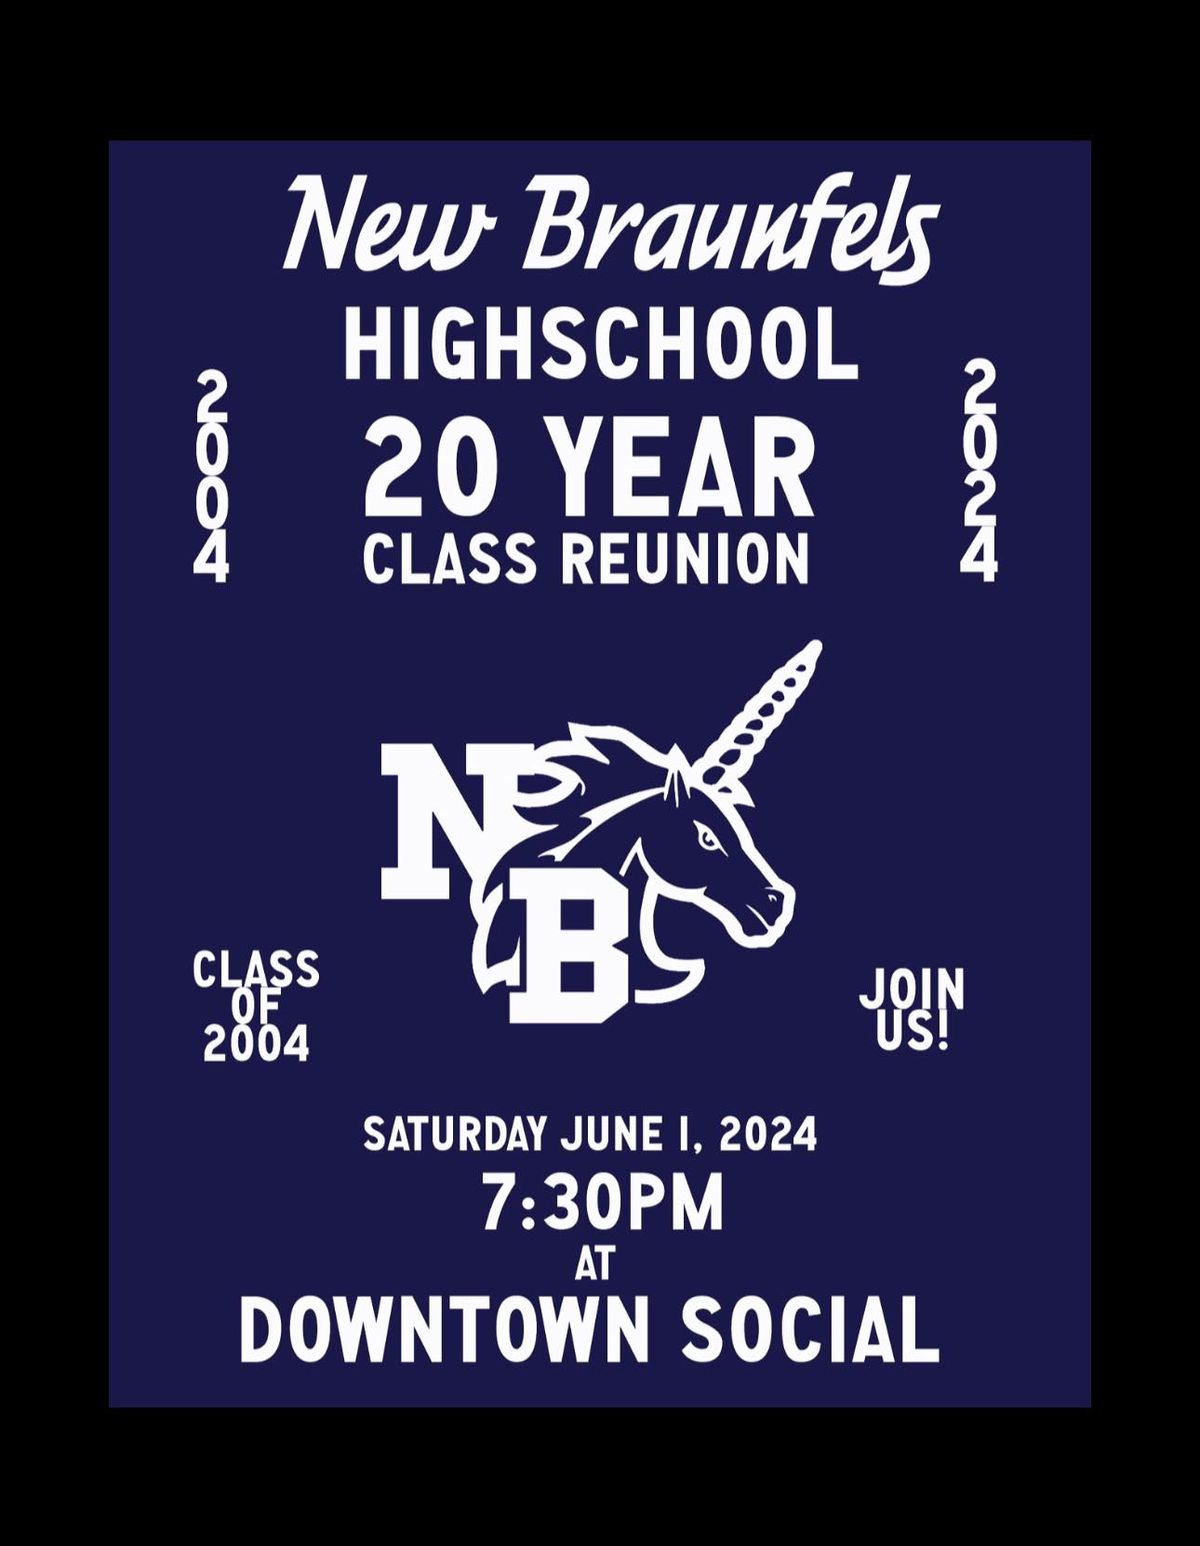 NBHS Class of 2004 20-Year Reunion